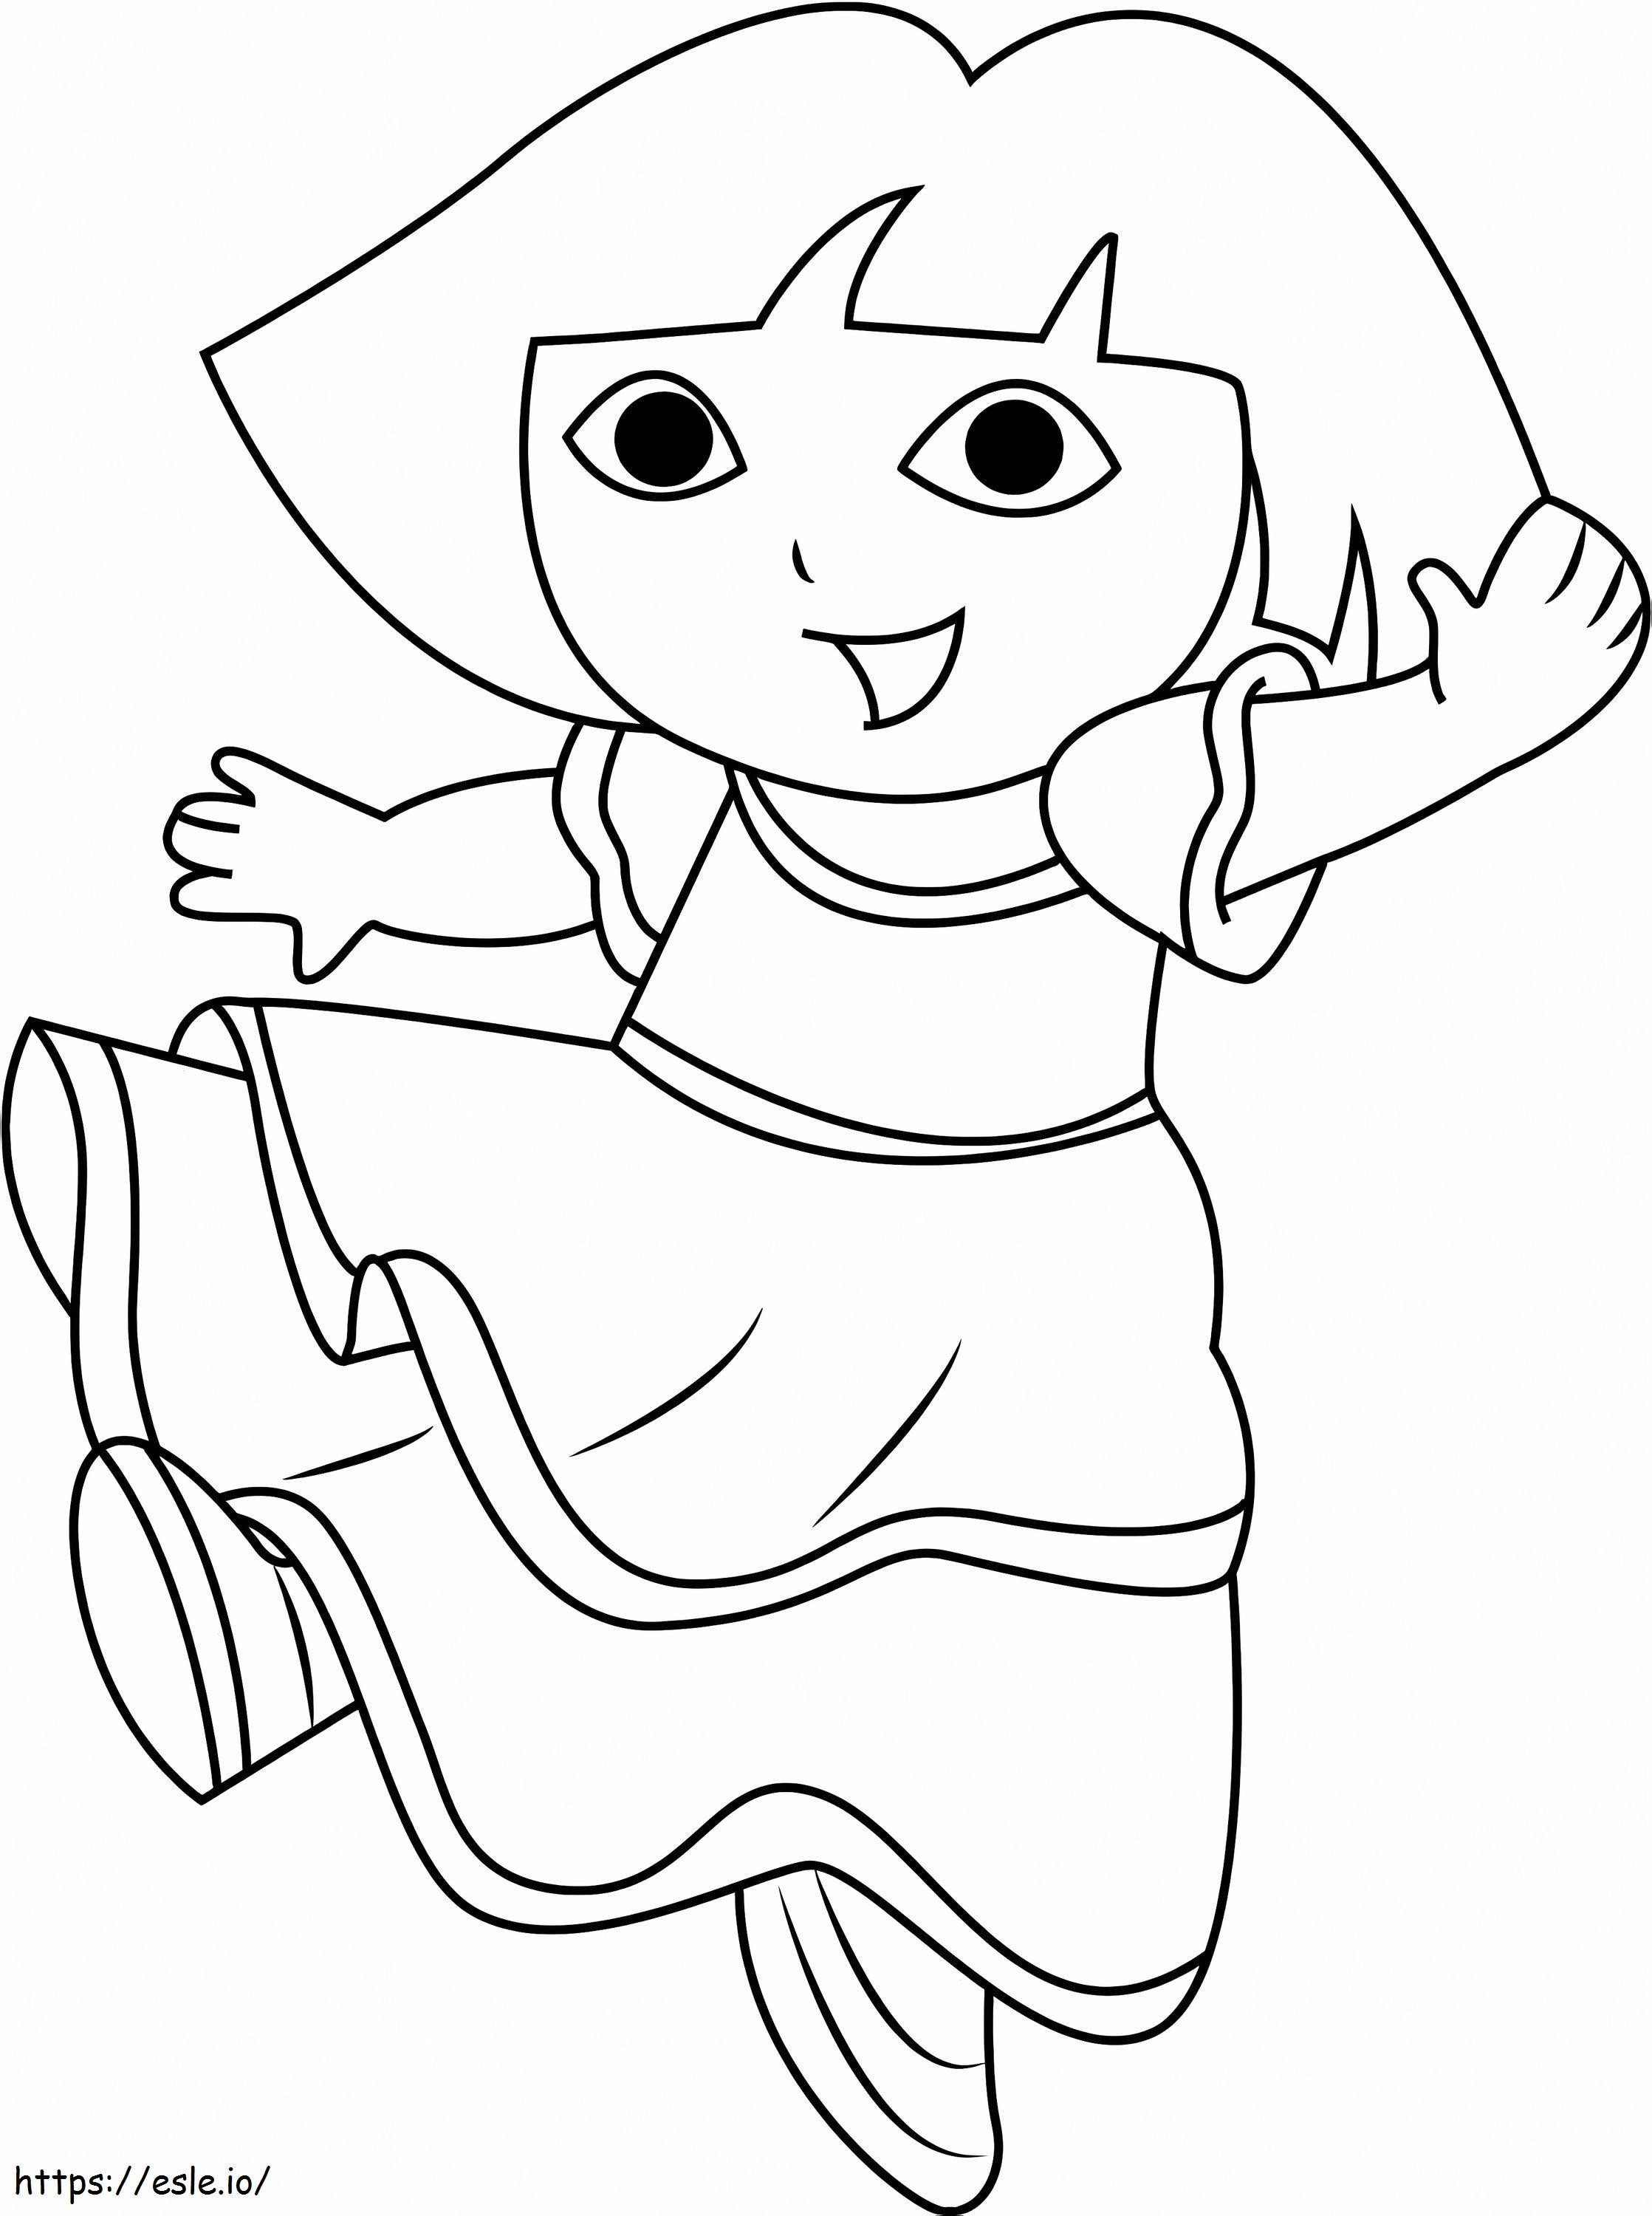 Dora Is Dancing coloring page